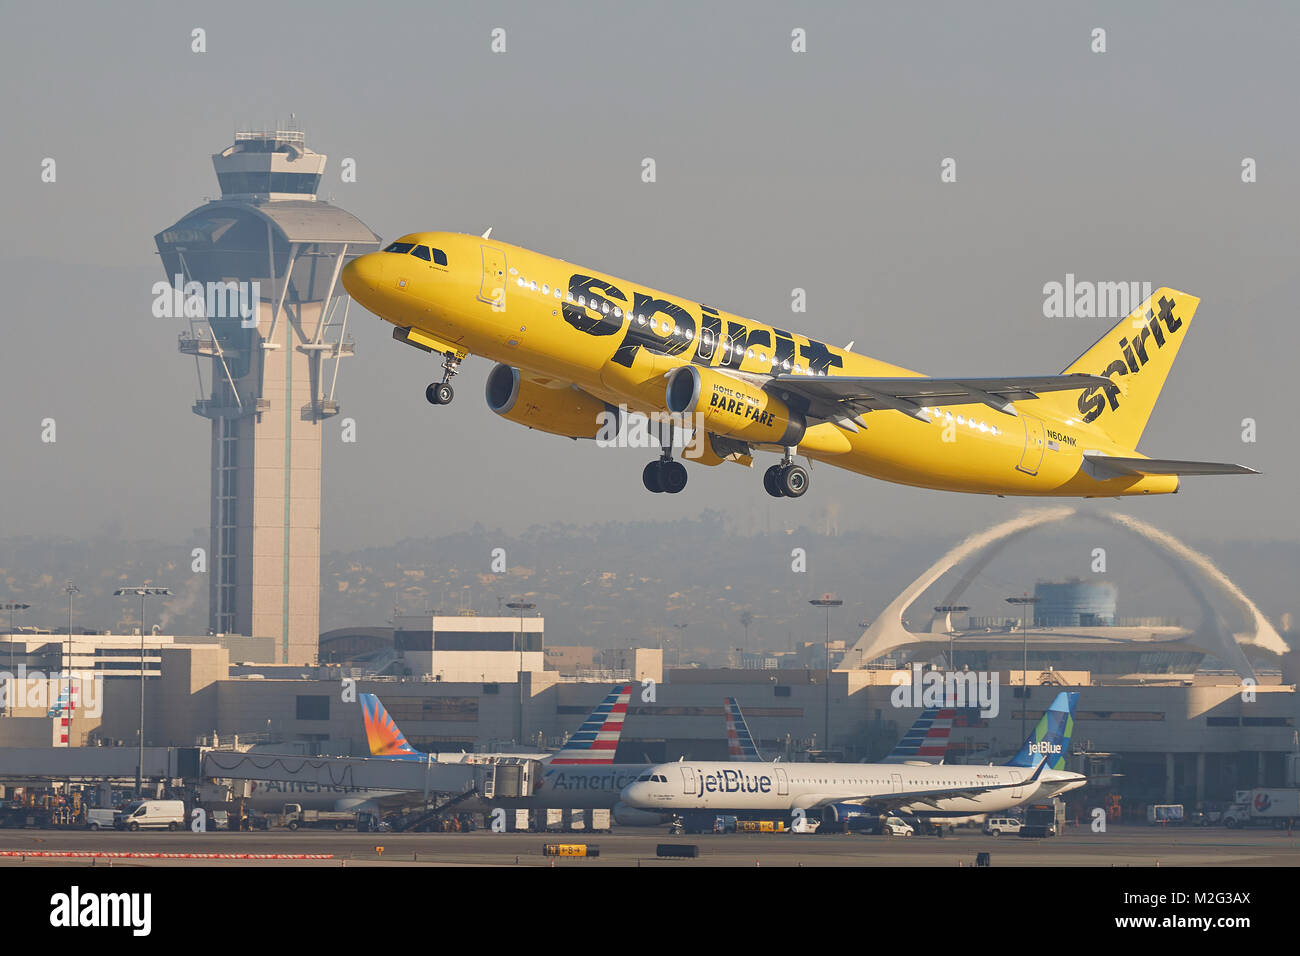 Spirit Airlines Bright Yellow Airbus A320 Taking Off From Los Angeles International Airport, The Air Traffic Control Tower And Theme Building Behind. Stock Photo